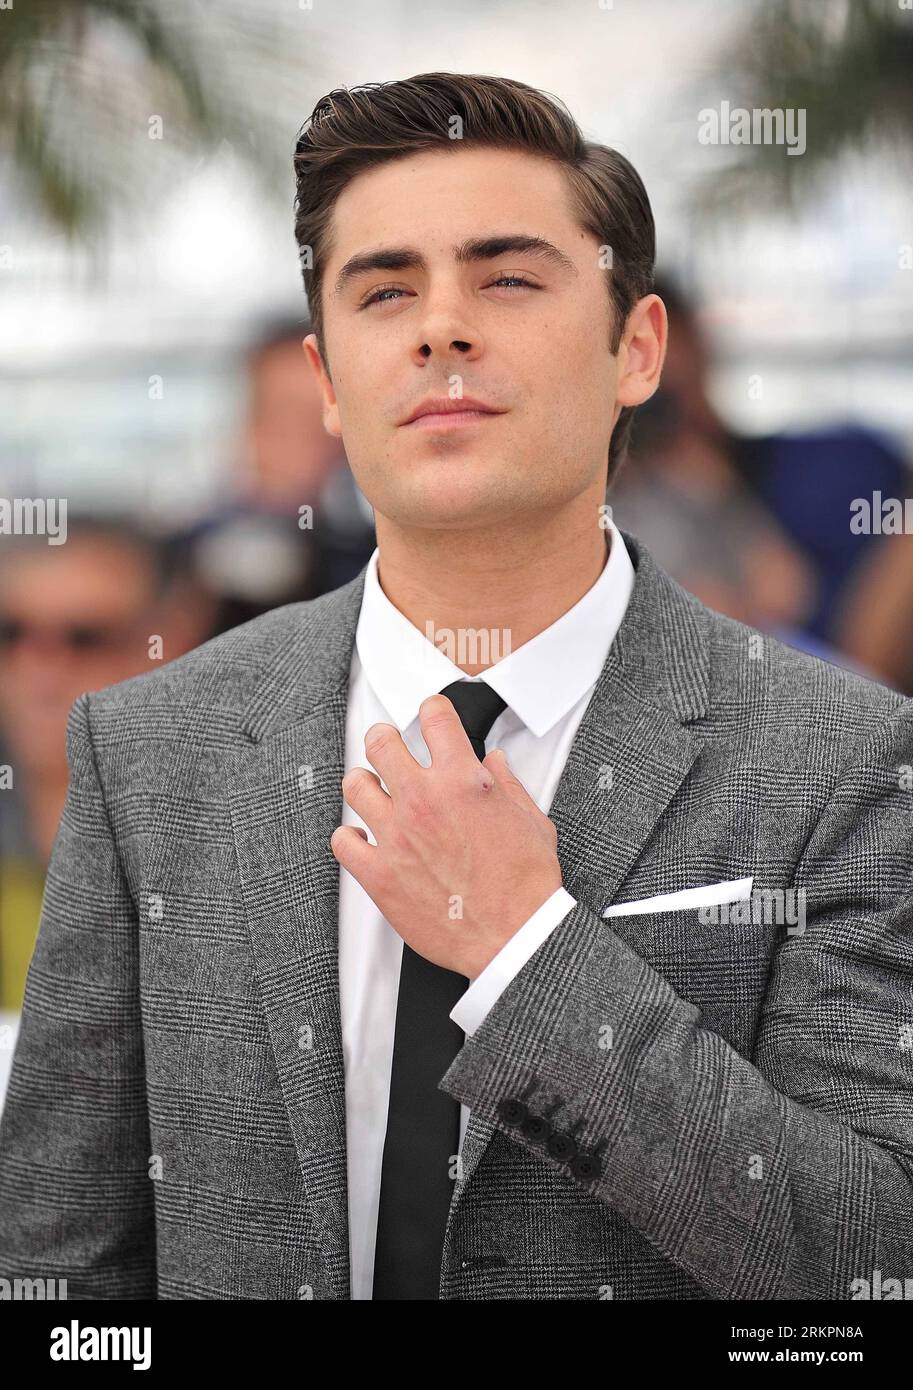 Bildnummer: 58030788  Datum: 24.05.2012  Copyright: imago/Xinhua (120524) -- CANNES, May 24, 2012 (Xinhua) -- Actor Zac Efron poses during a photocall for the film The Paperboy directed by Lee Daniels, at the 65th Cannes Film Festival, in Cannes, southern France, May 24, 2012. (Xinhua/Ye Pingfan)(srb) FRANCE-CANNES-FILM FESTIVAL-PHOTOCALL PUBLICATIONxNOTxINxCHN Kultur Entertainment People Film 65. Internationale Filmfestspiele Cannes Porträt x0x xkg 2012 hoch      58030788 Date 24 05 2012 Copyright Imago XINHUA  Cannes May 24 2012 XINHUA Actor Zac Efron Poses during a photo call for The Film T Stock Photo